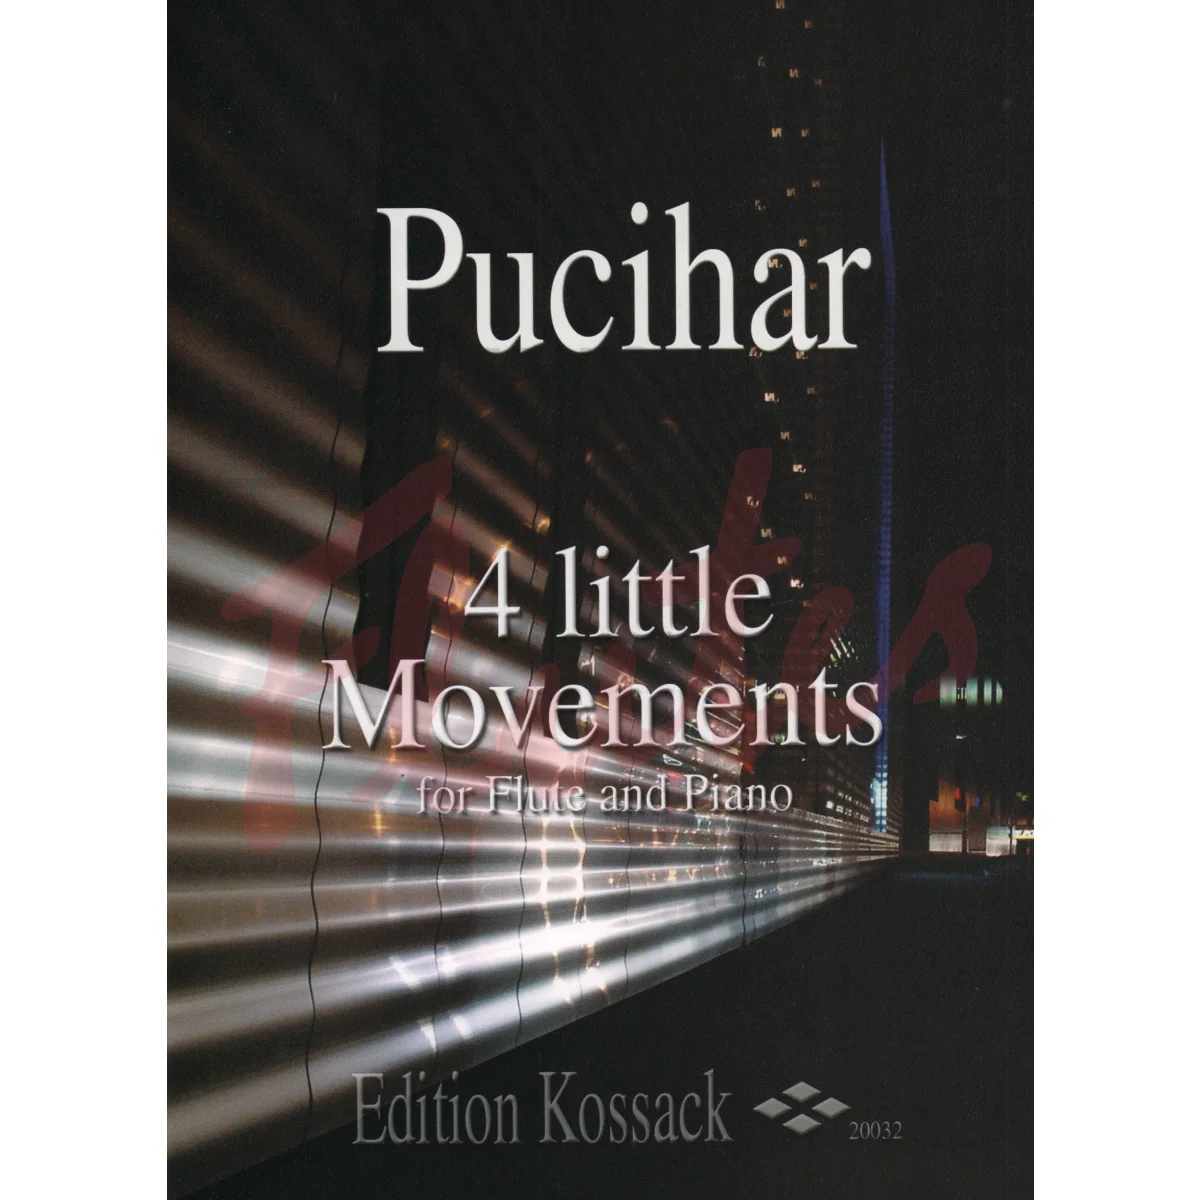 Four Little Movements for Flute and Piano